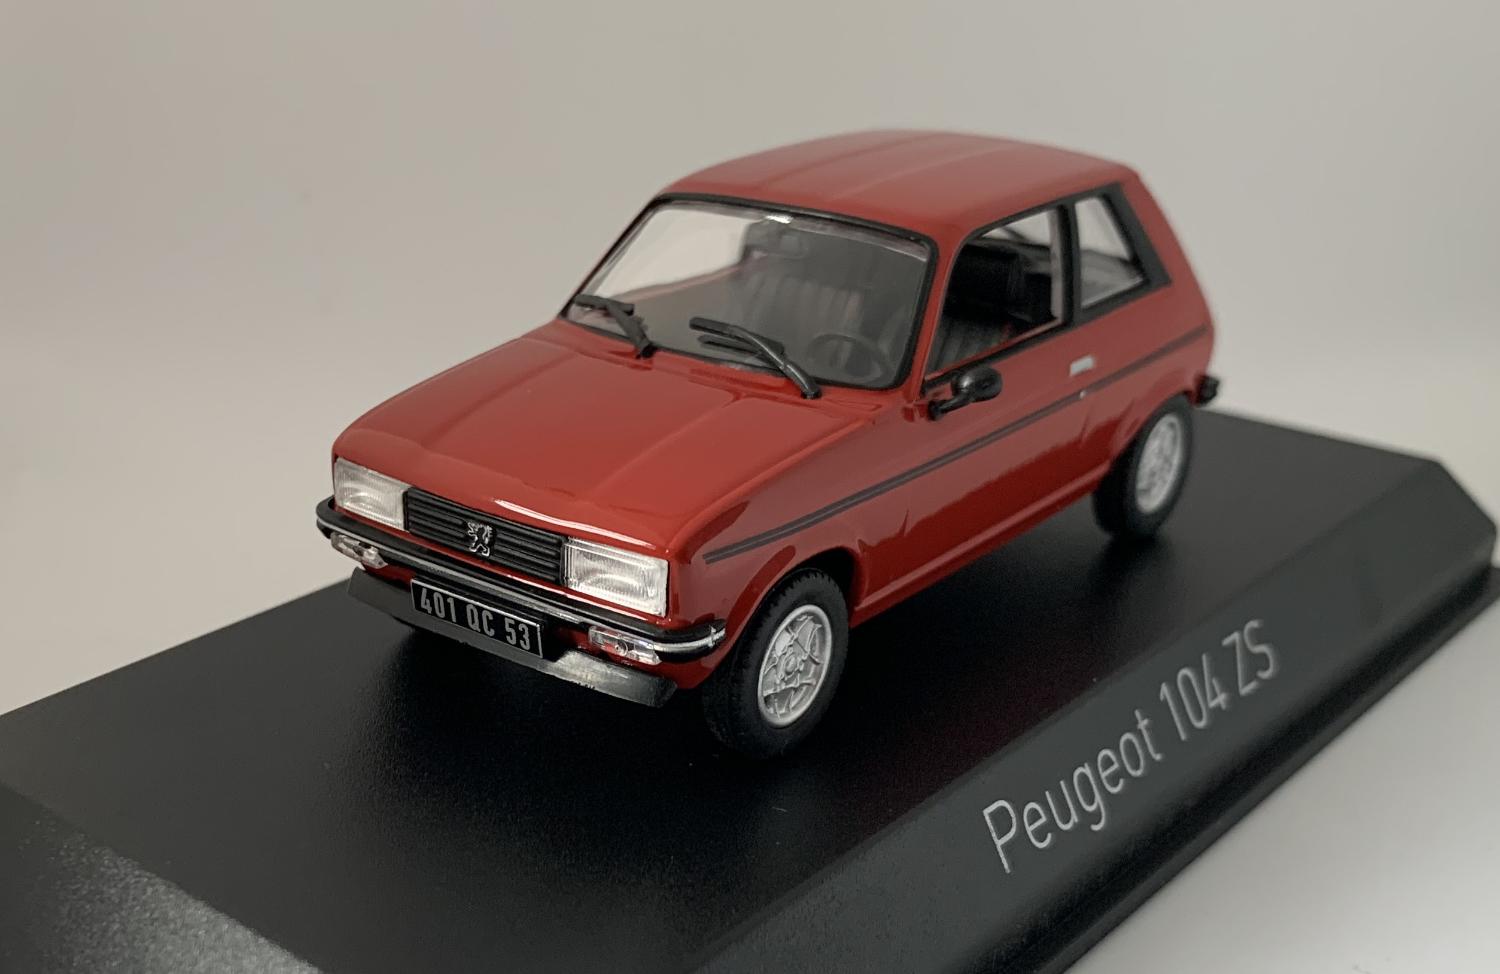 Peugeot 104 ZS 1979 in persan red 1:43 scale model from Norev